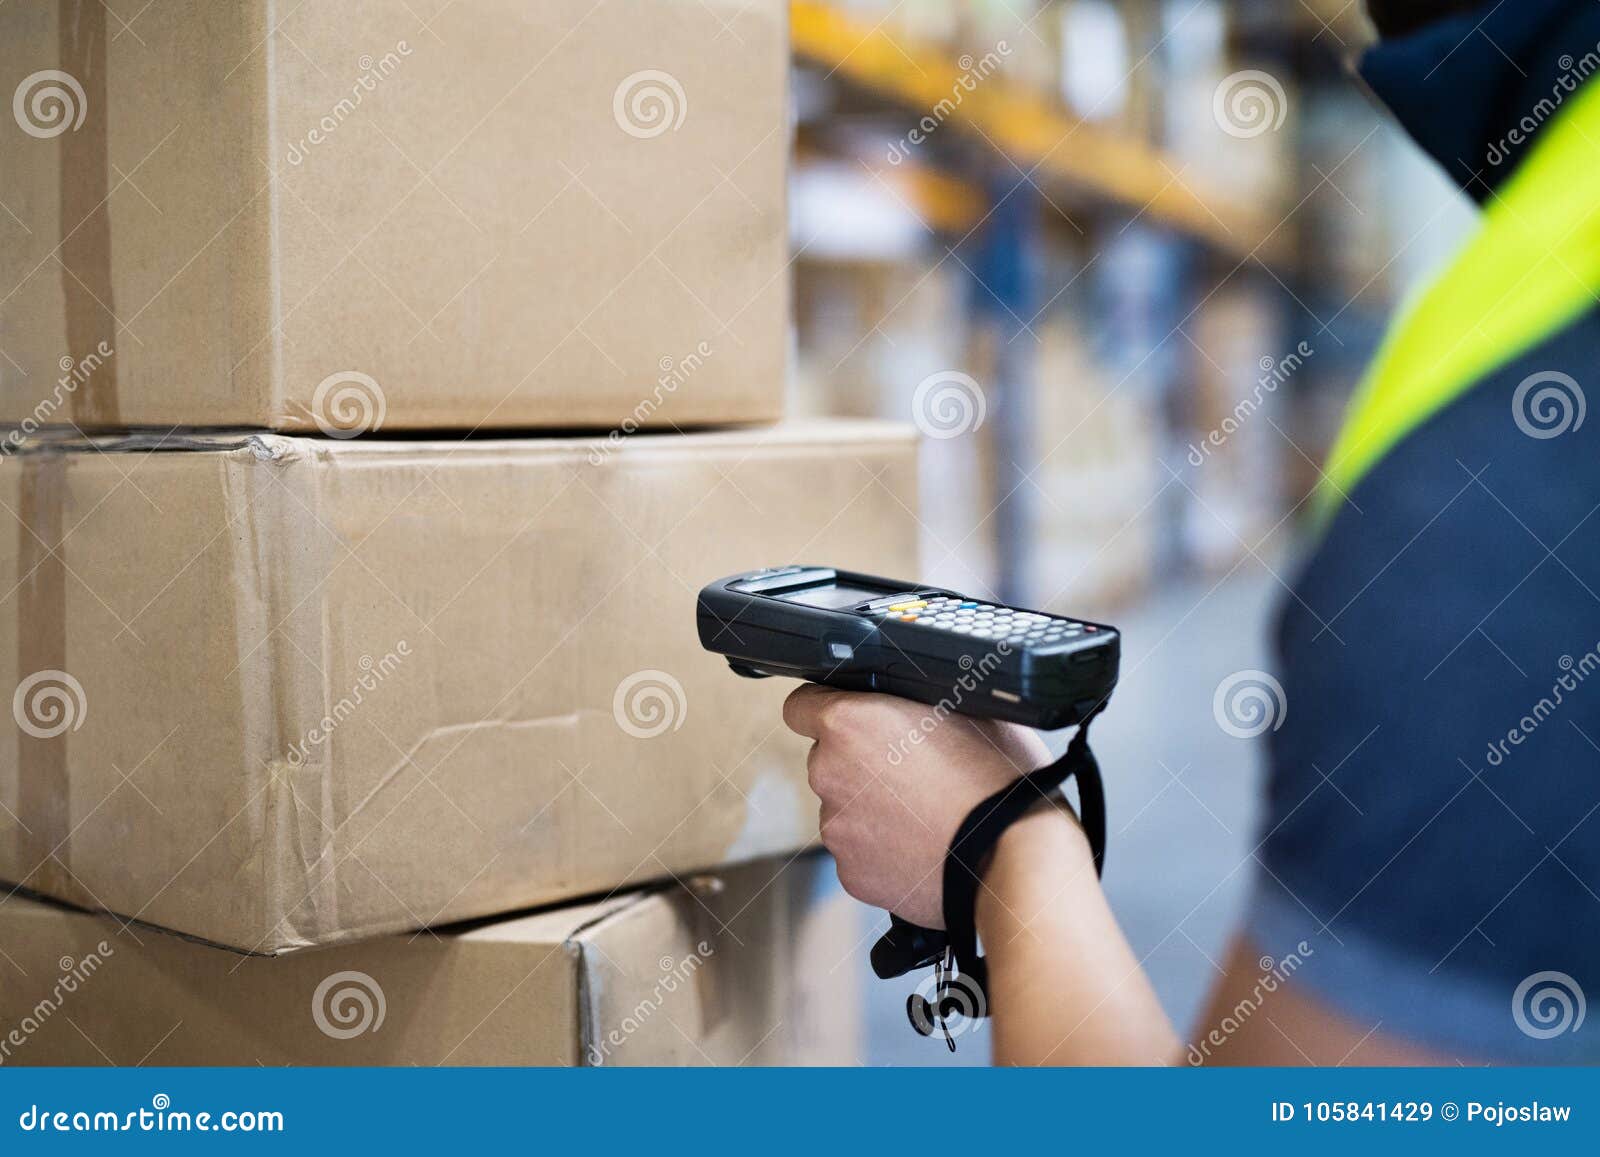 male warehouse worker with barcode scanner.